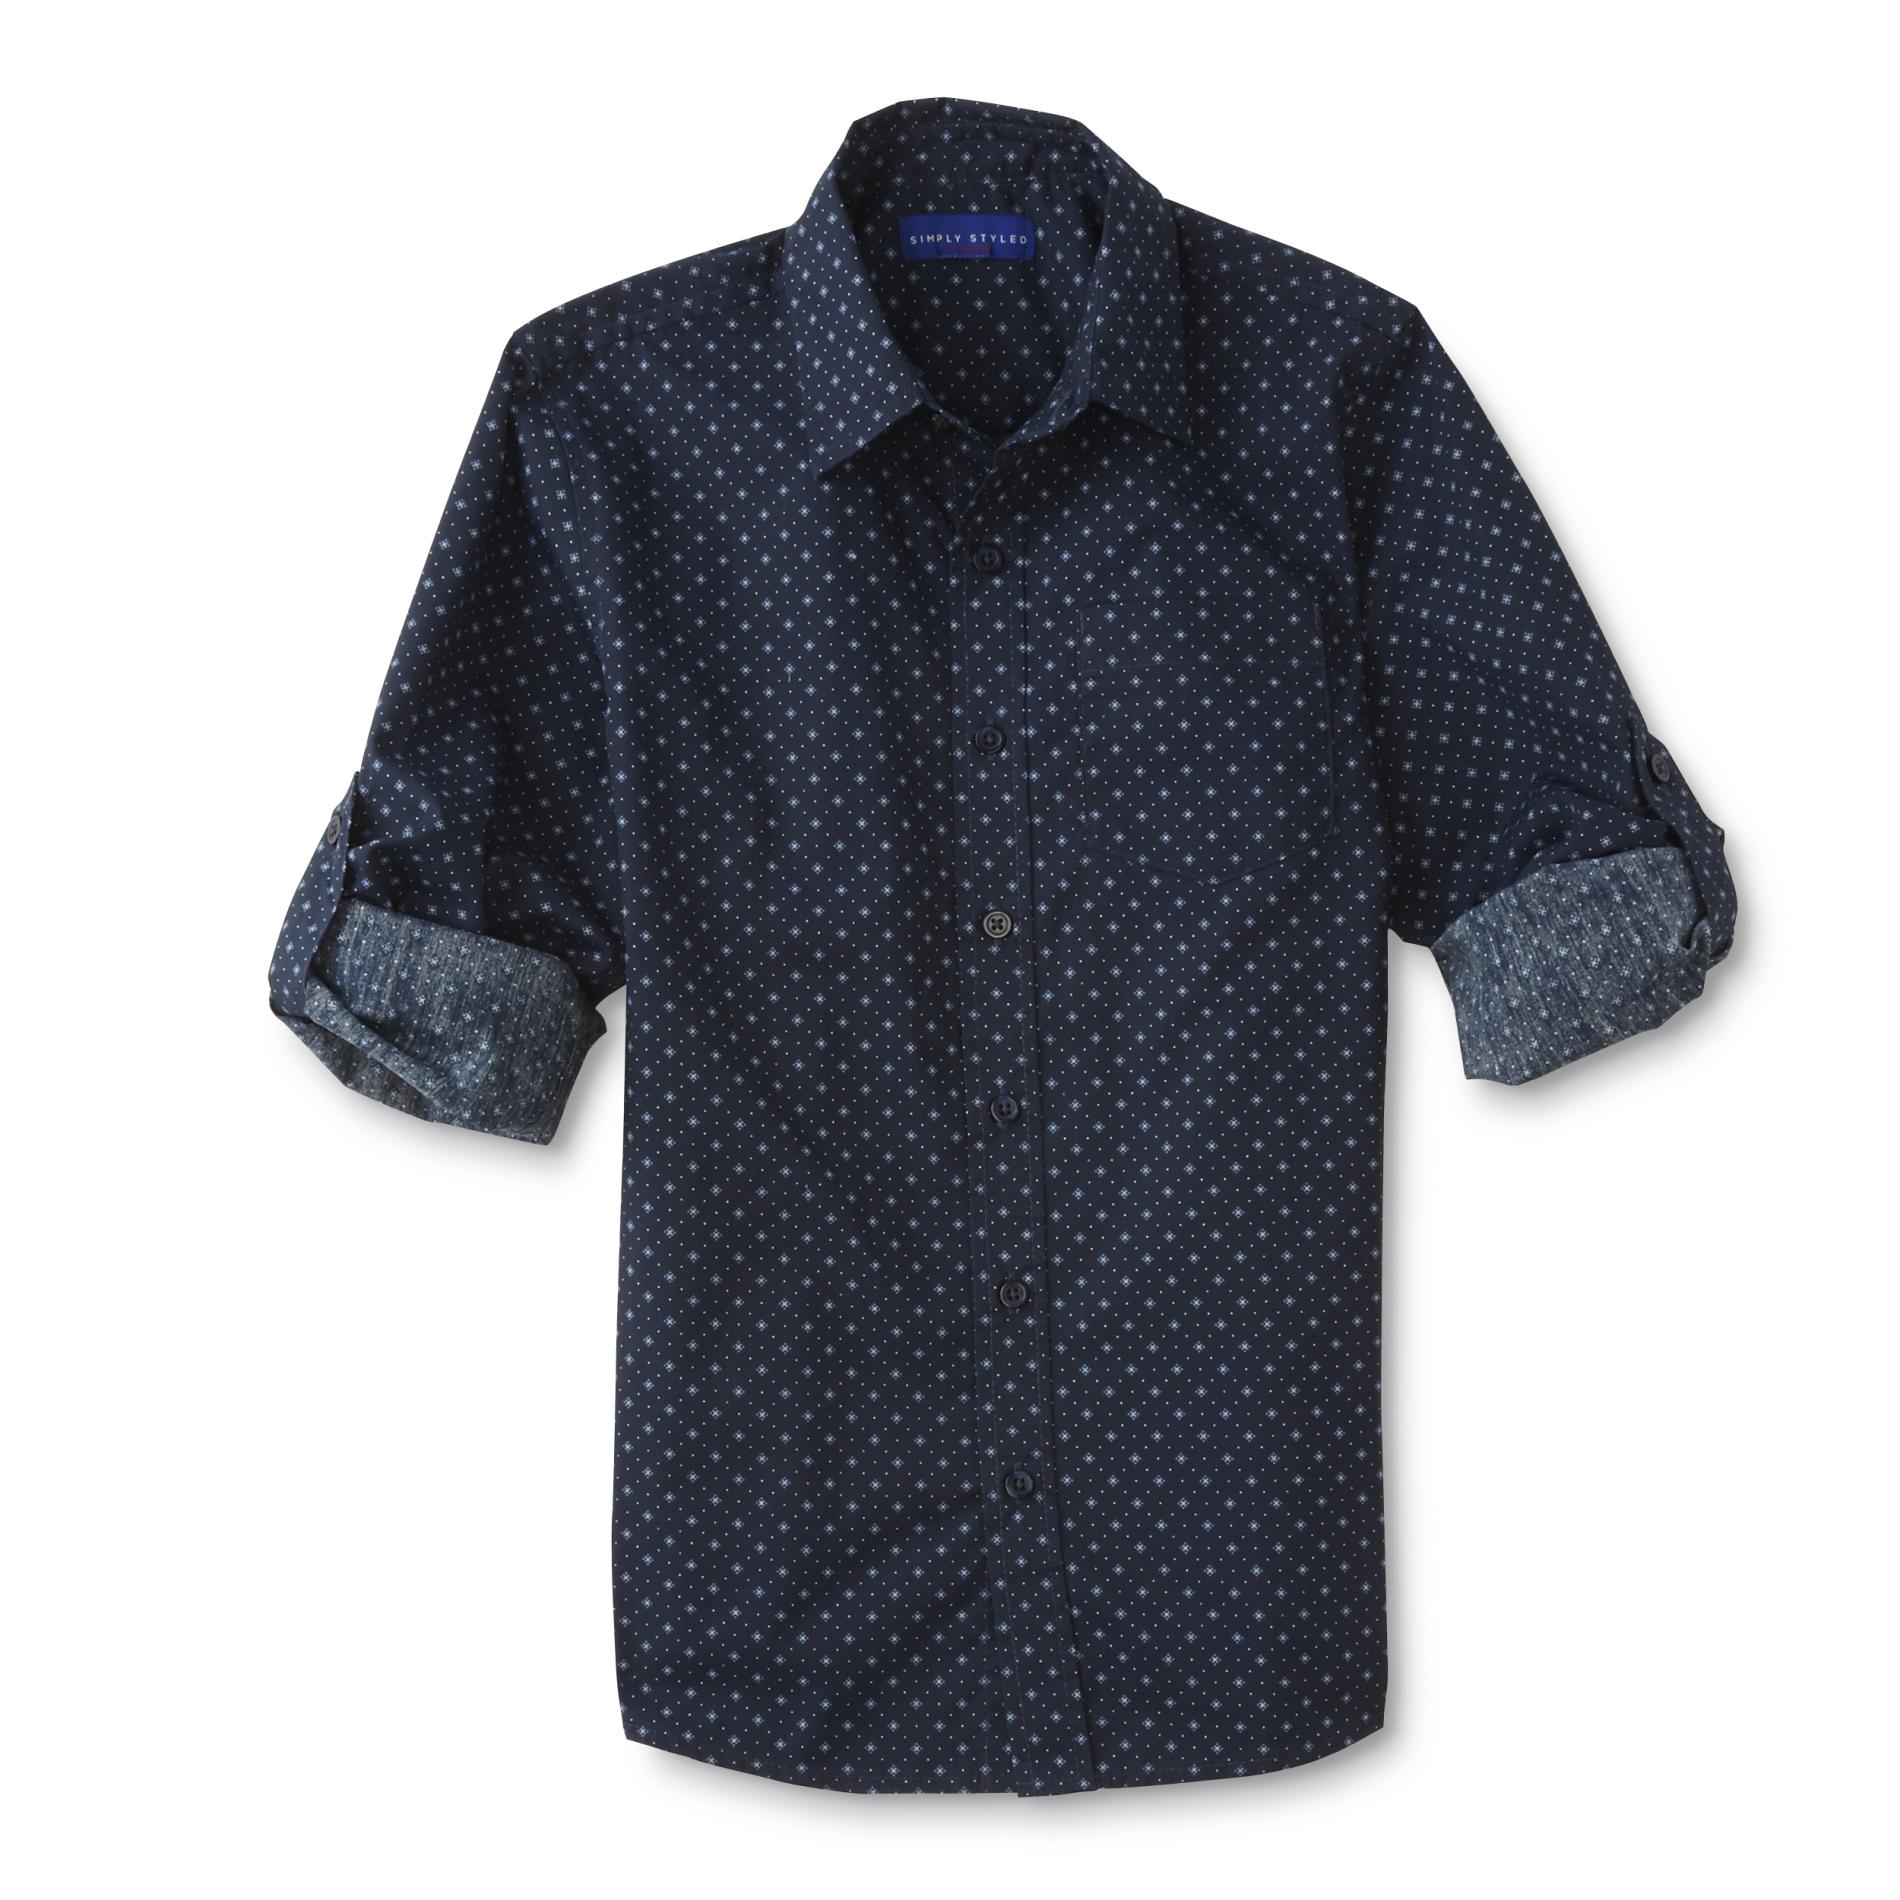 Simply Styled Boys' Button-Front Shirt - Foulard